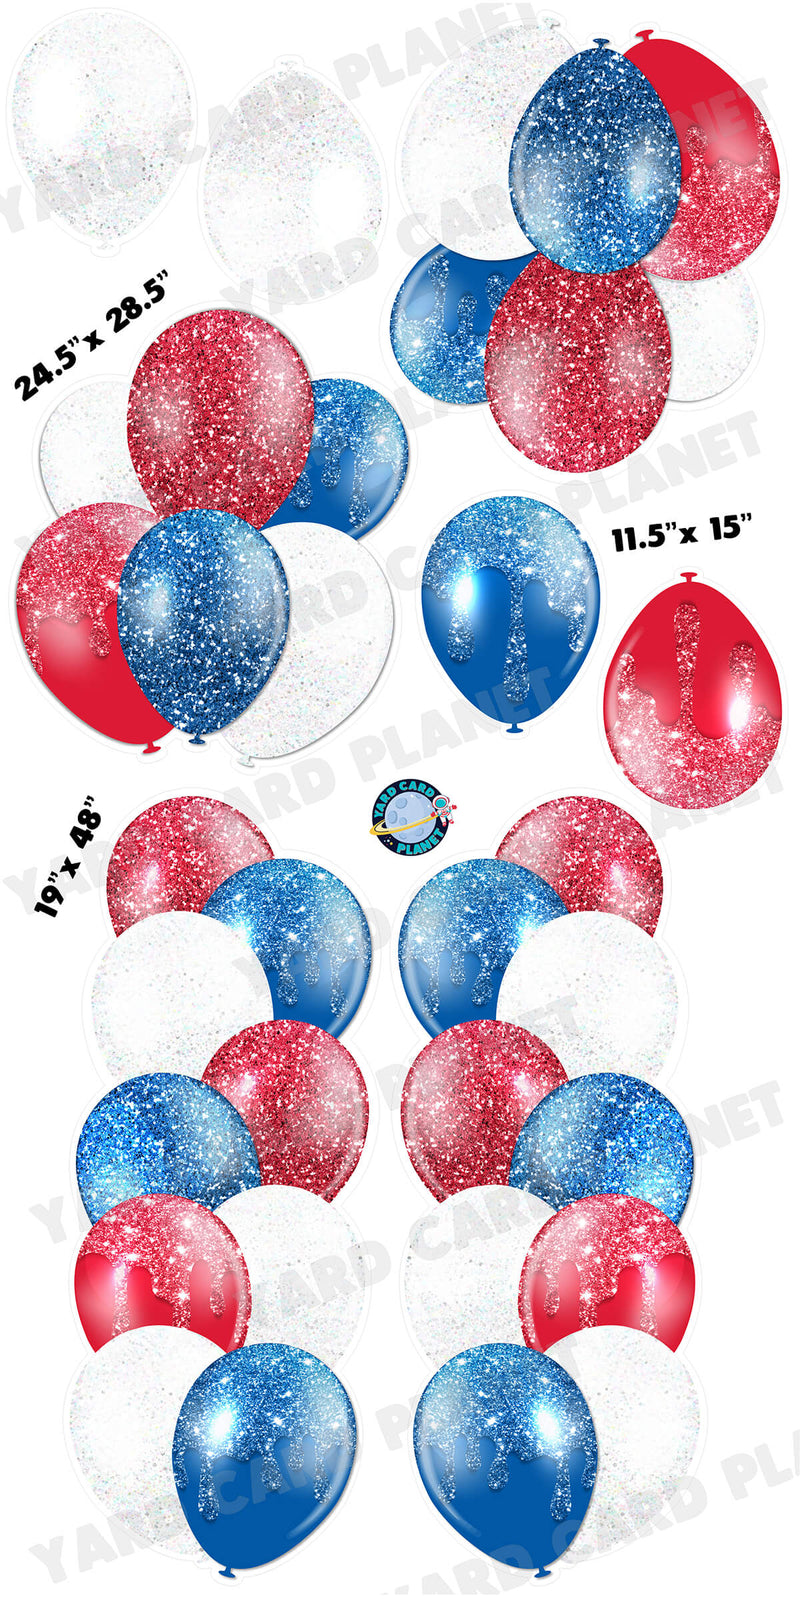 Red, White and Blue Glitter Balloon Towers, Bouquets and Singles Yard Card Set